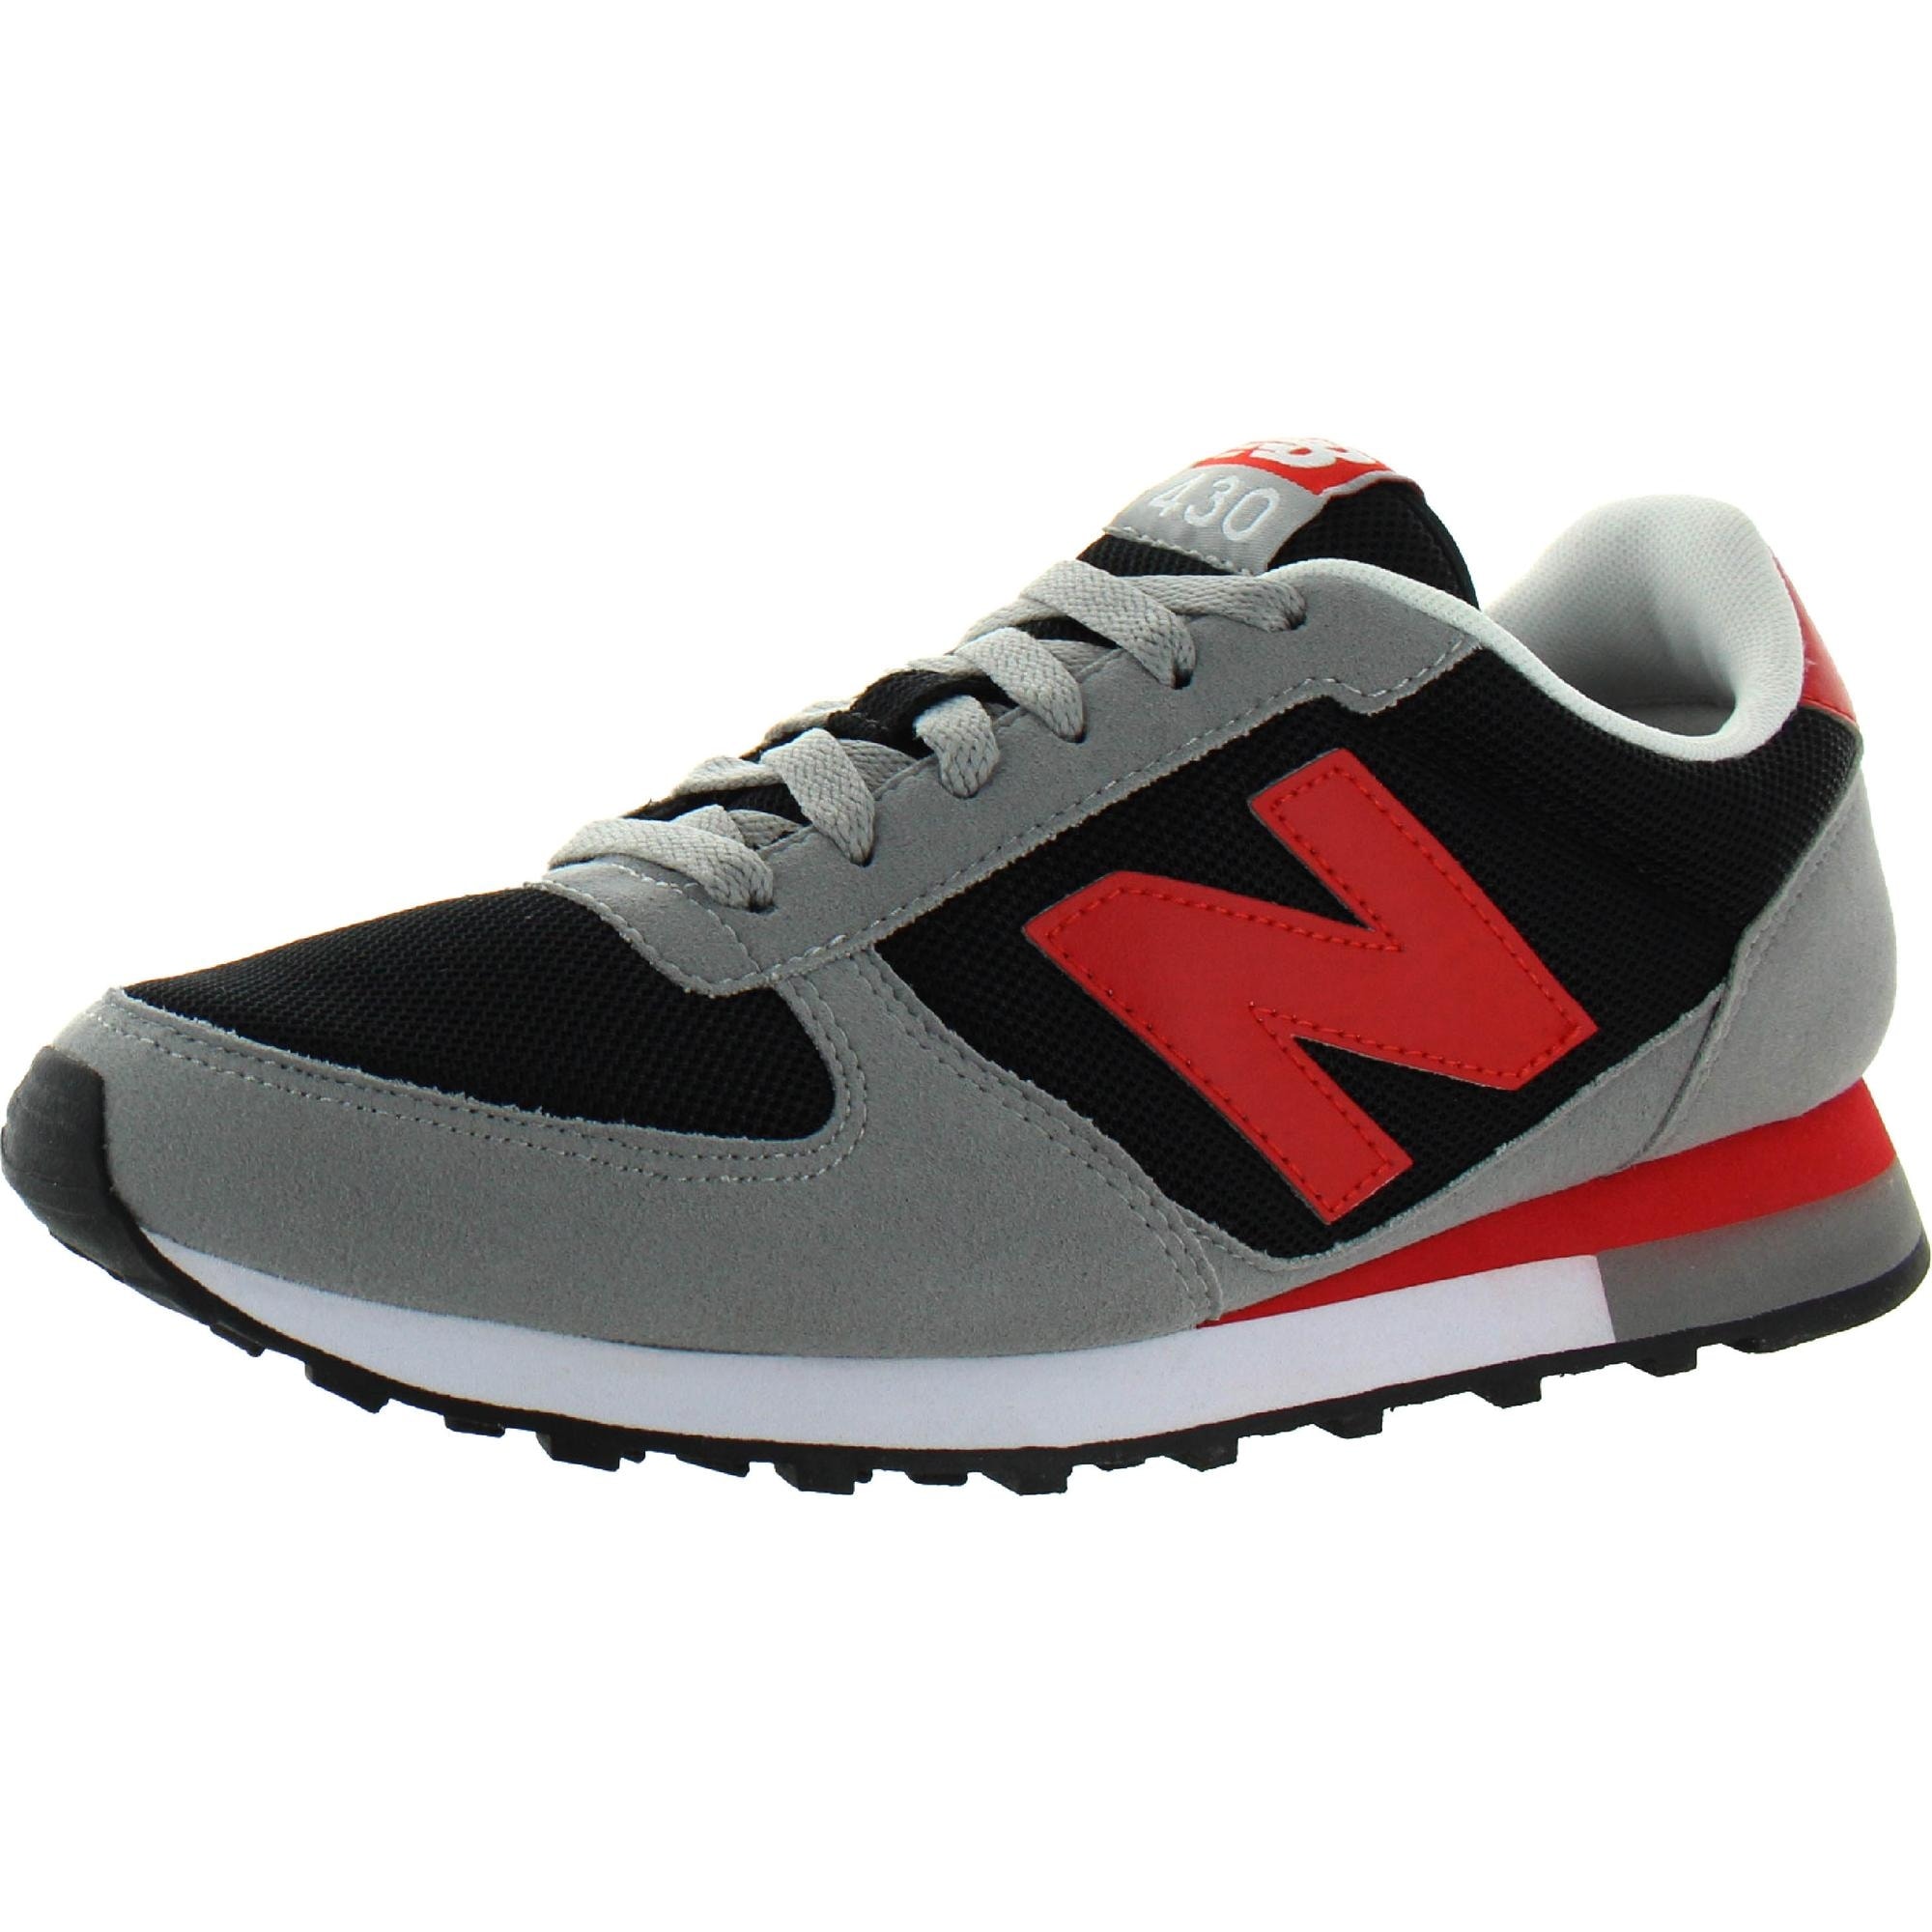 Shop New Balance Men's U430 Suede Low-Top Classic Lifestyle Running  Sneakers Shoe - Gray/Black/Red - Overstock - 31688897